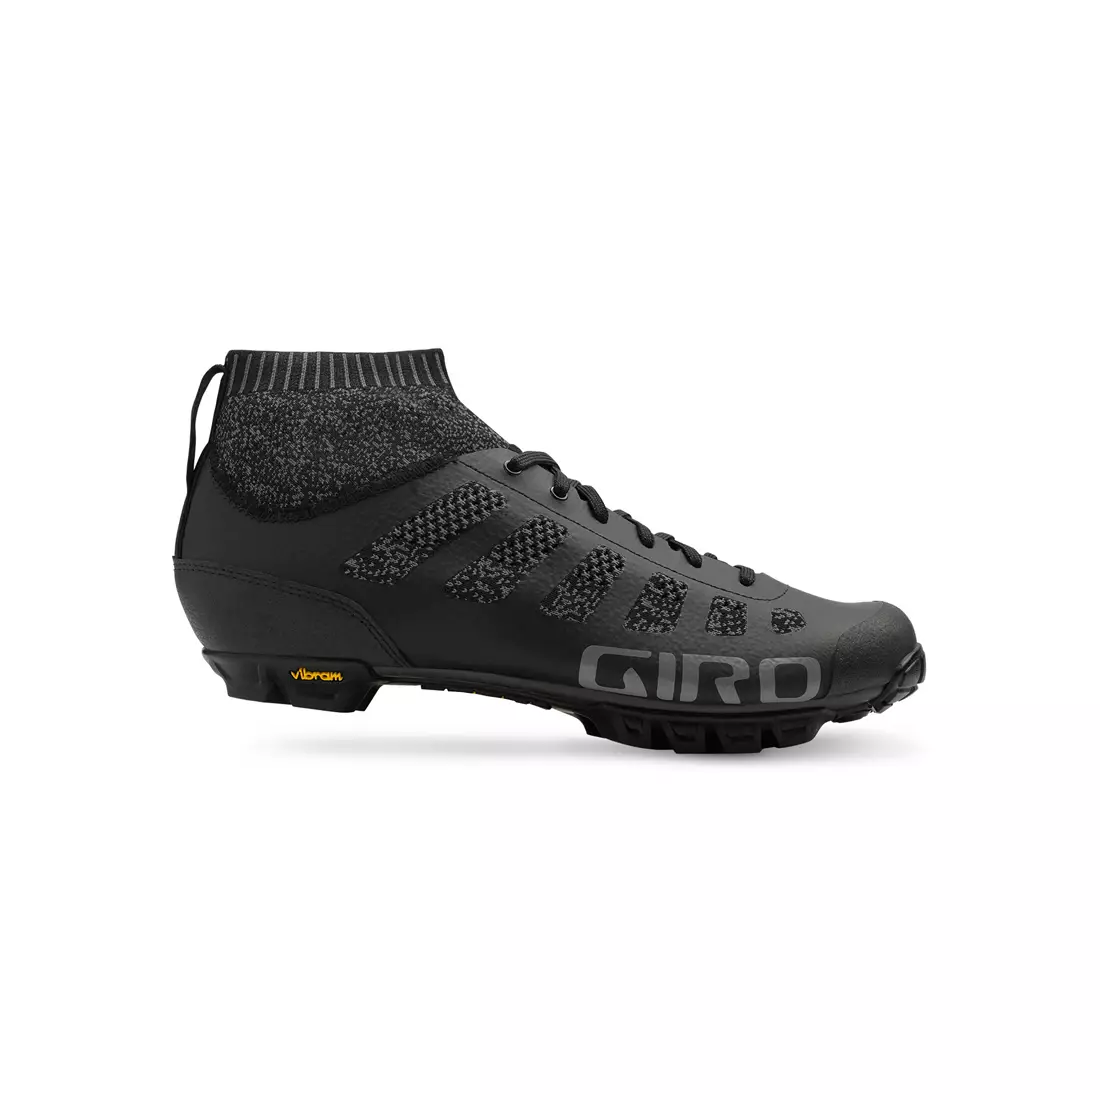 Men's bicycle boots  GIRO EMPIRE VR70 KNIT black charcoal 